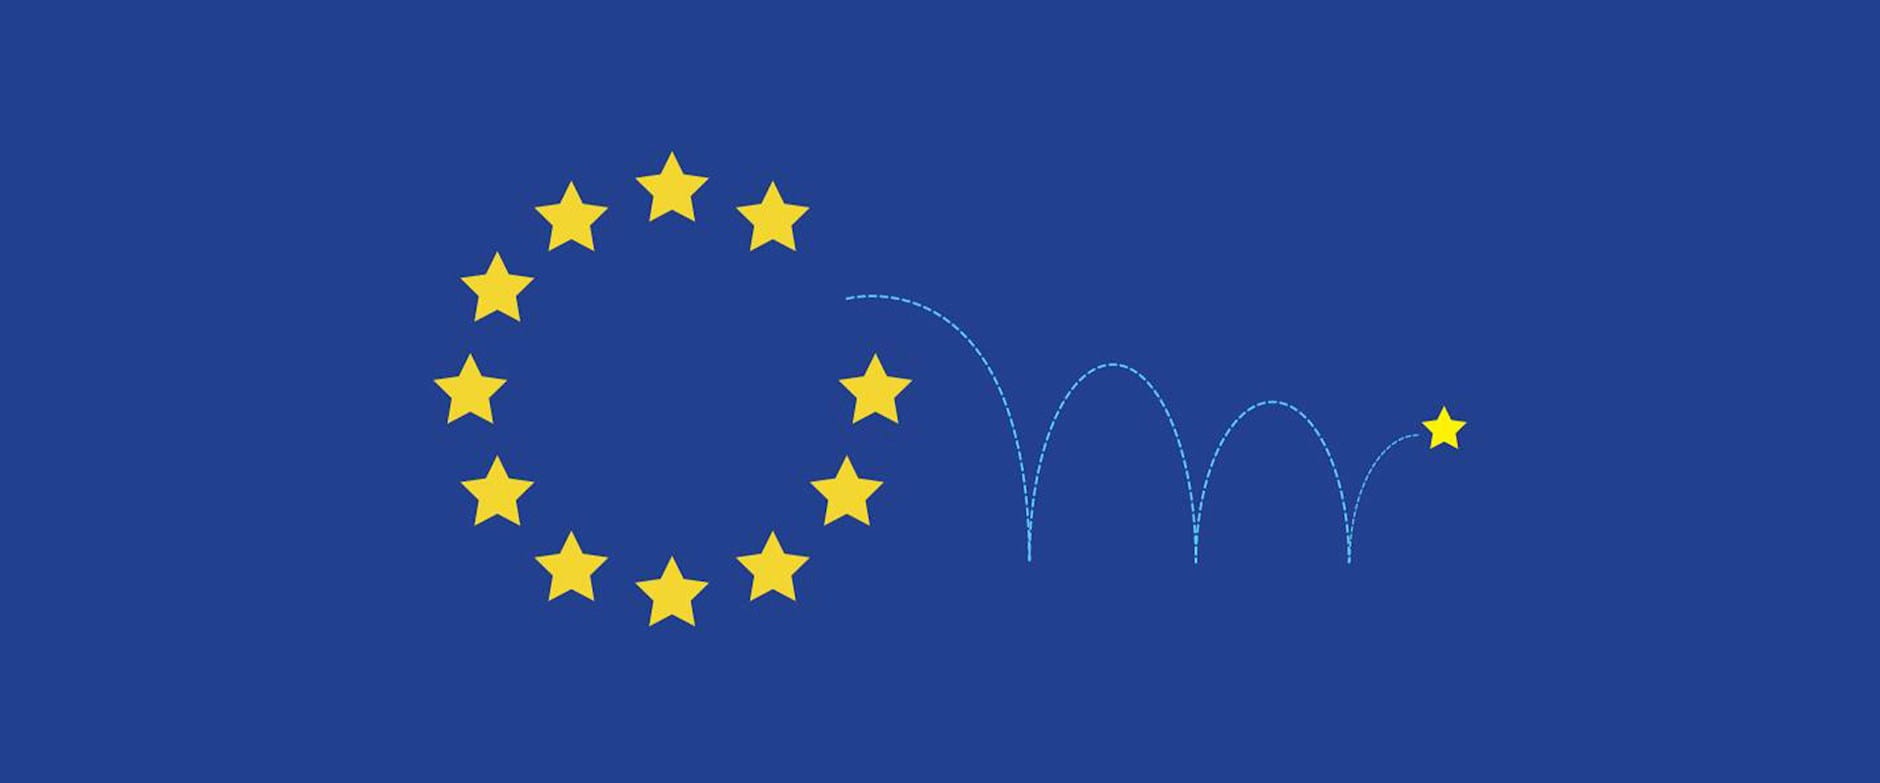 European Union flag with a star bouncing off